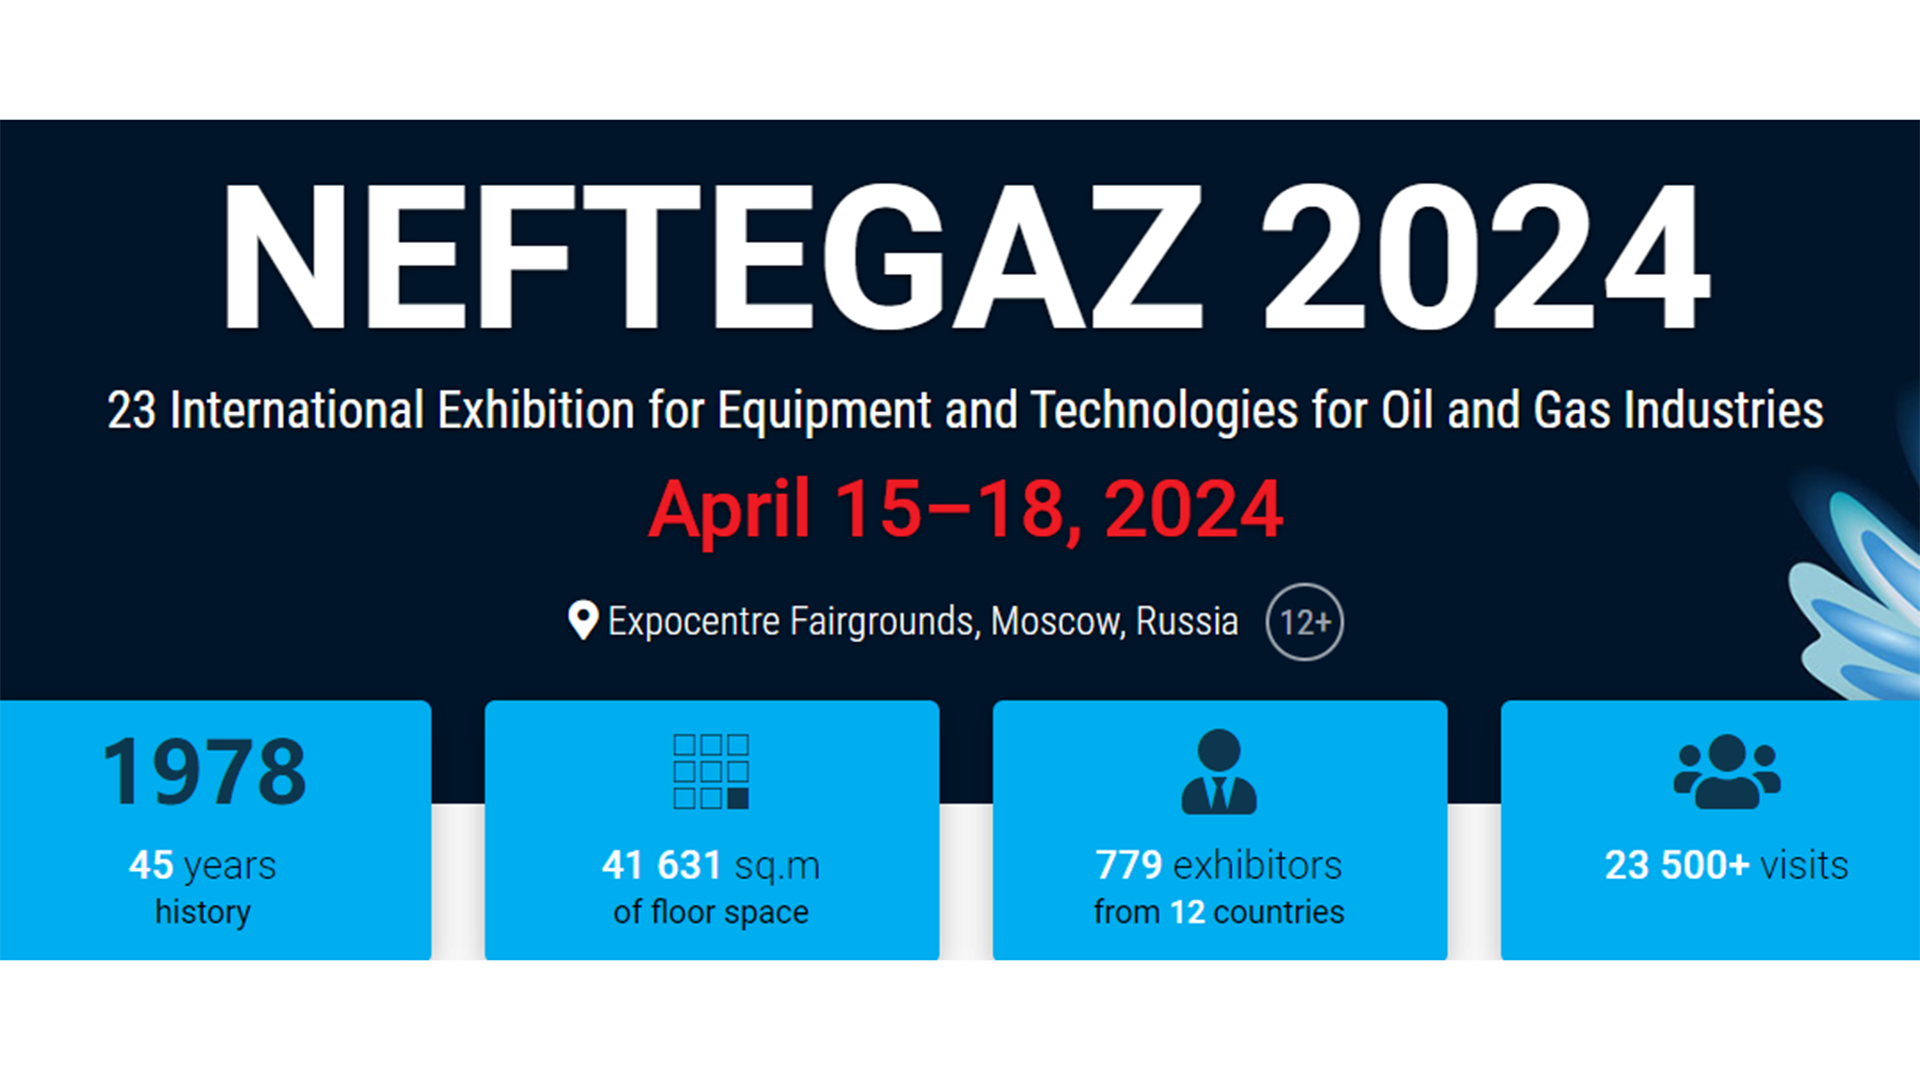 The grand opening of the 2024 Moscow Oil and Gas Exhibition (NEFTEGAZ) in Moscow, Russia